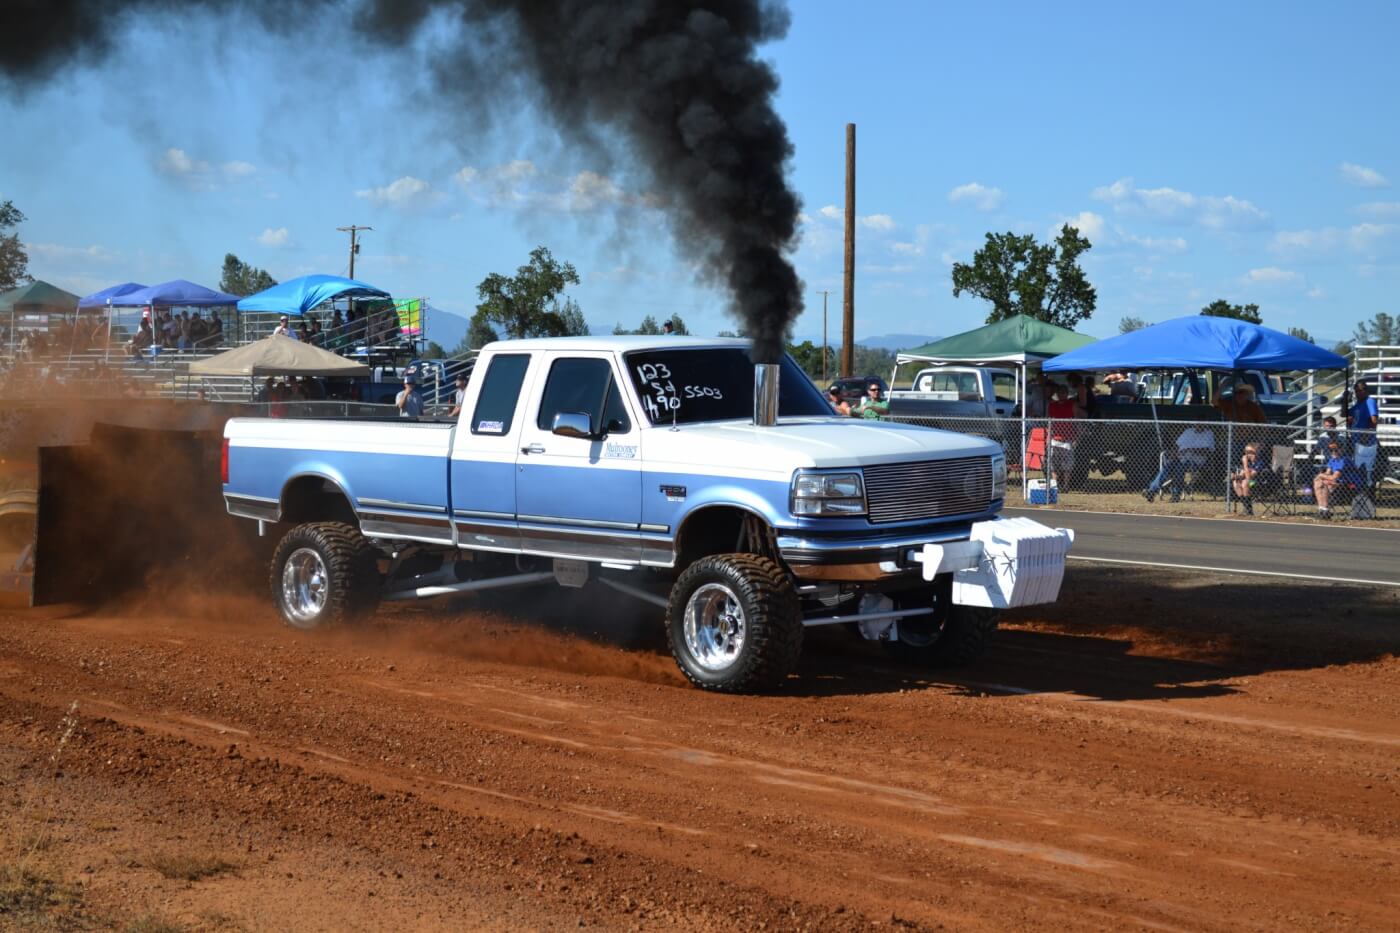 Ross Mulroney went 284 feet in the Street Class, after running 12s earlier in the day at the drag strip. There's no Cummins here, as the OBS 7.3L truck is still all Ford powered.